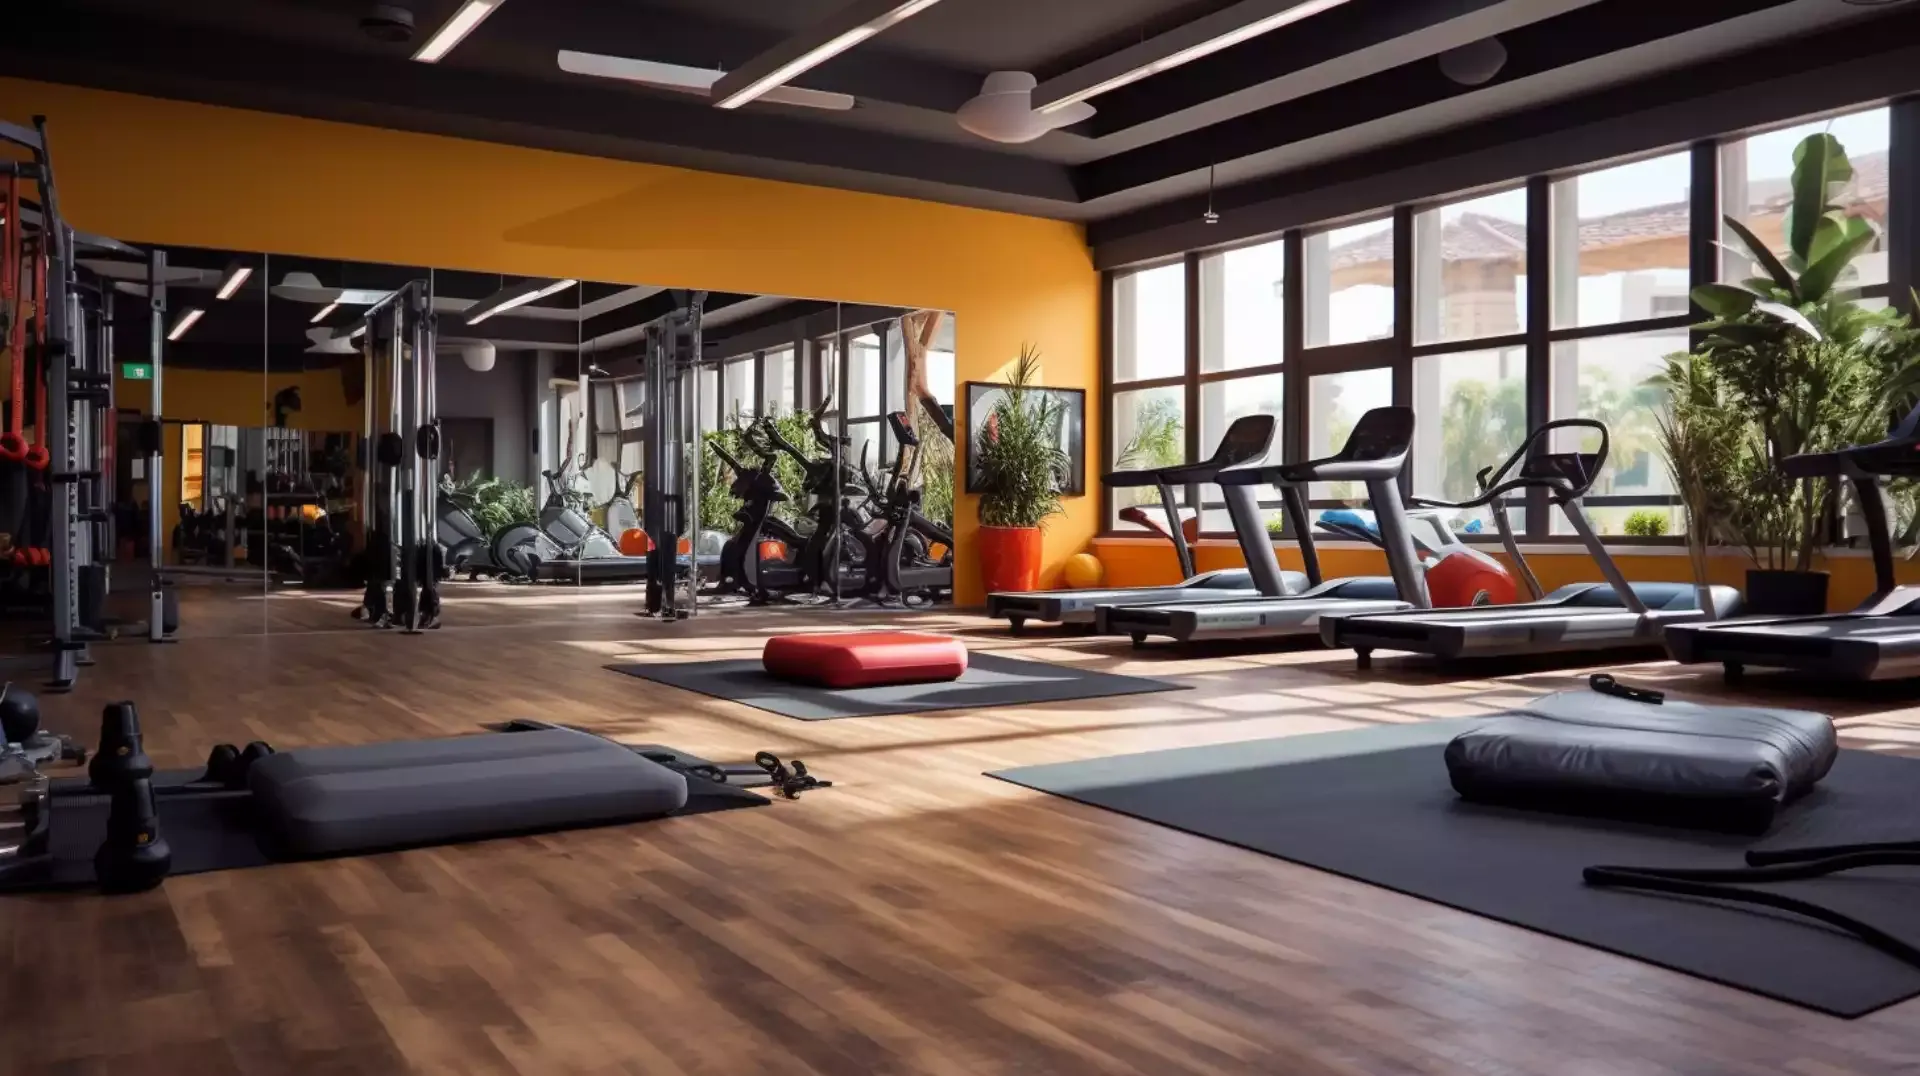 Fitness Options in Arabian Ranches - The variety of fitness classes available in Dubai's fitness centers